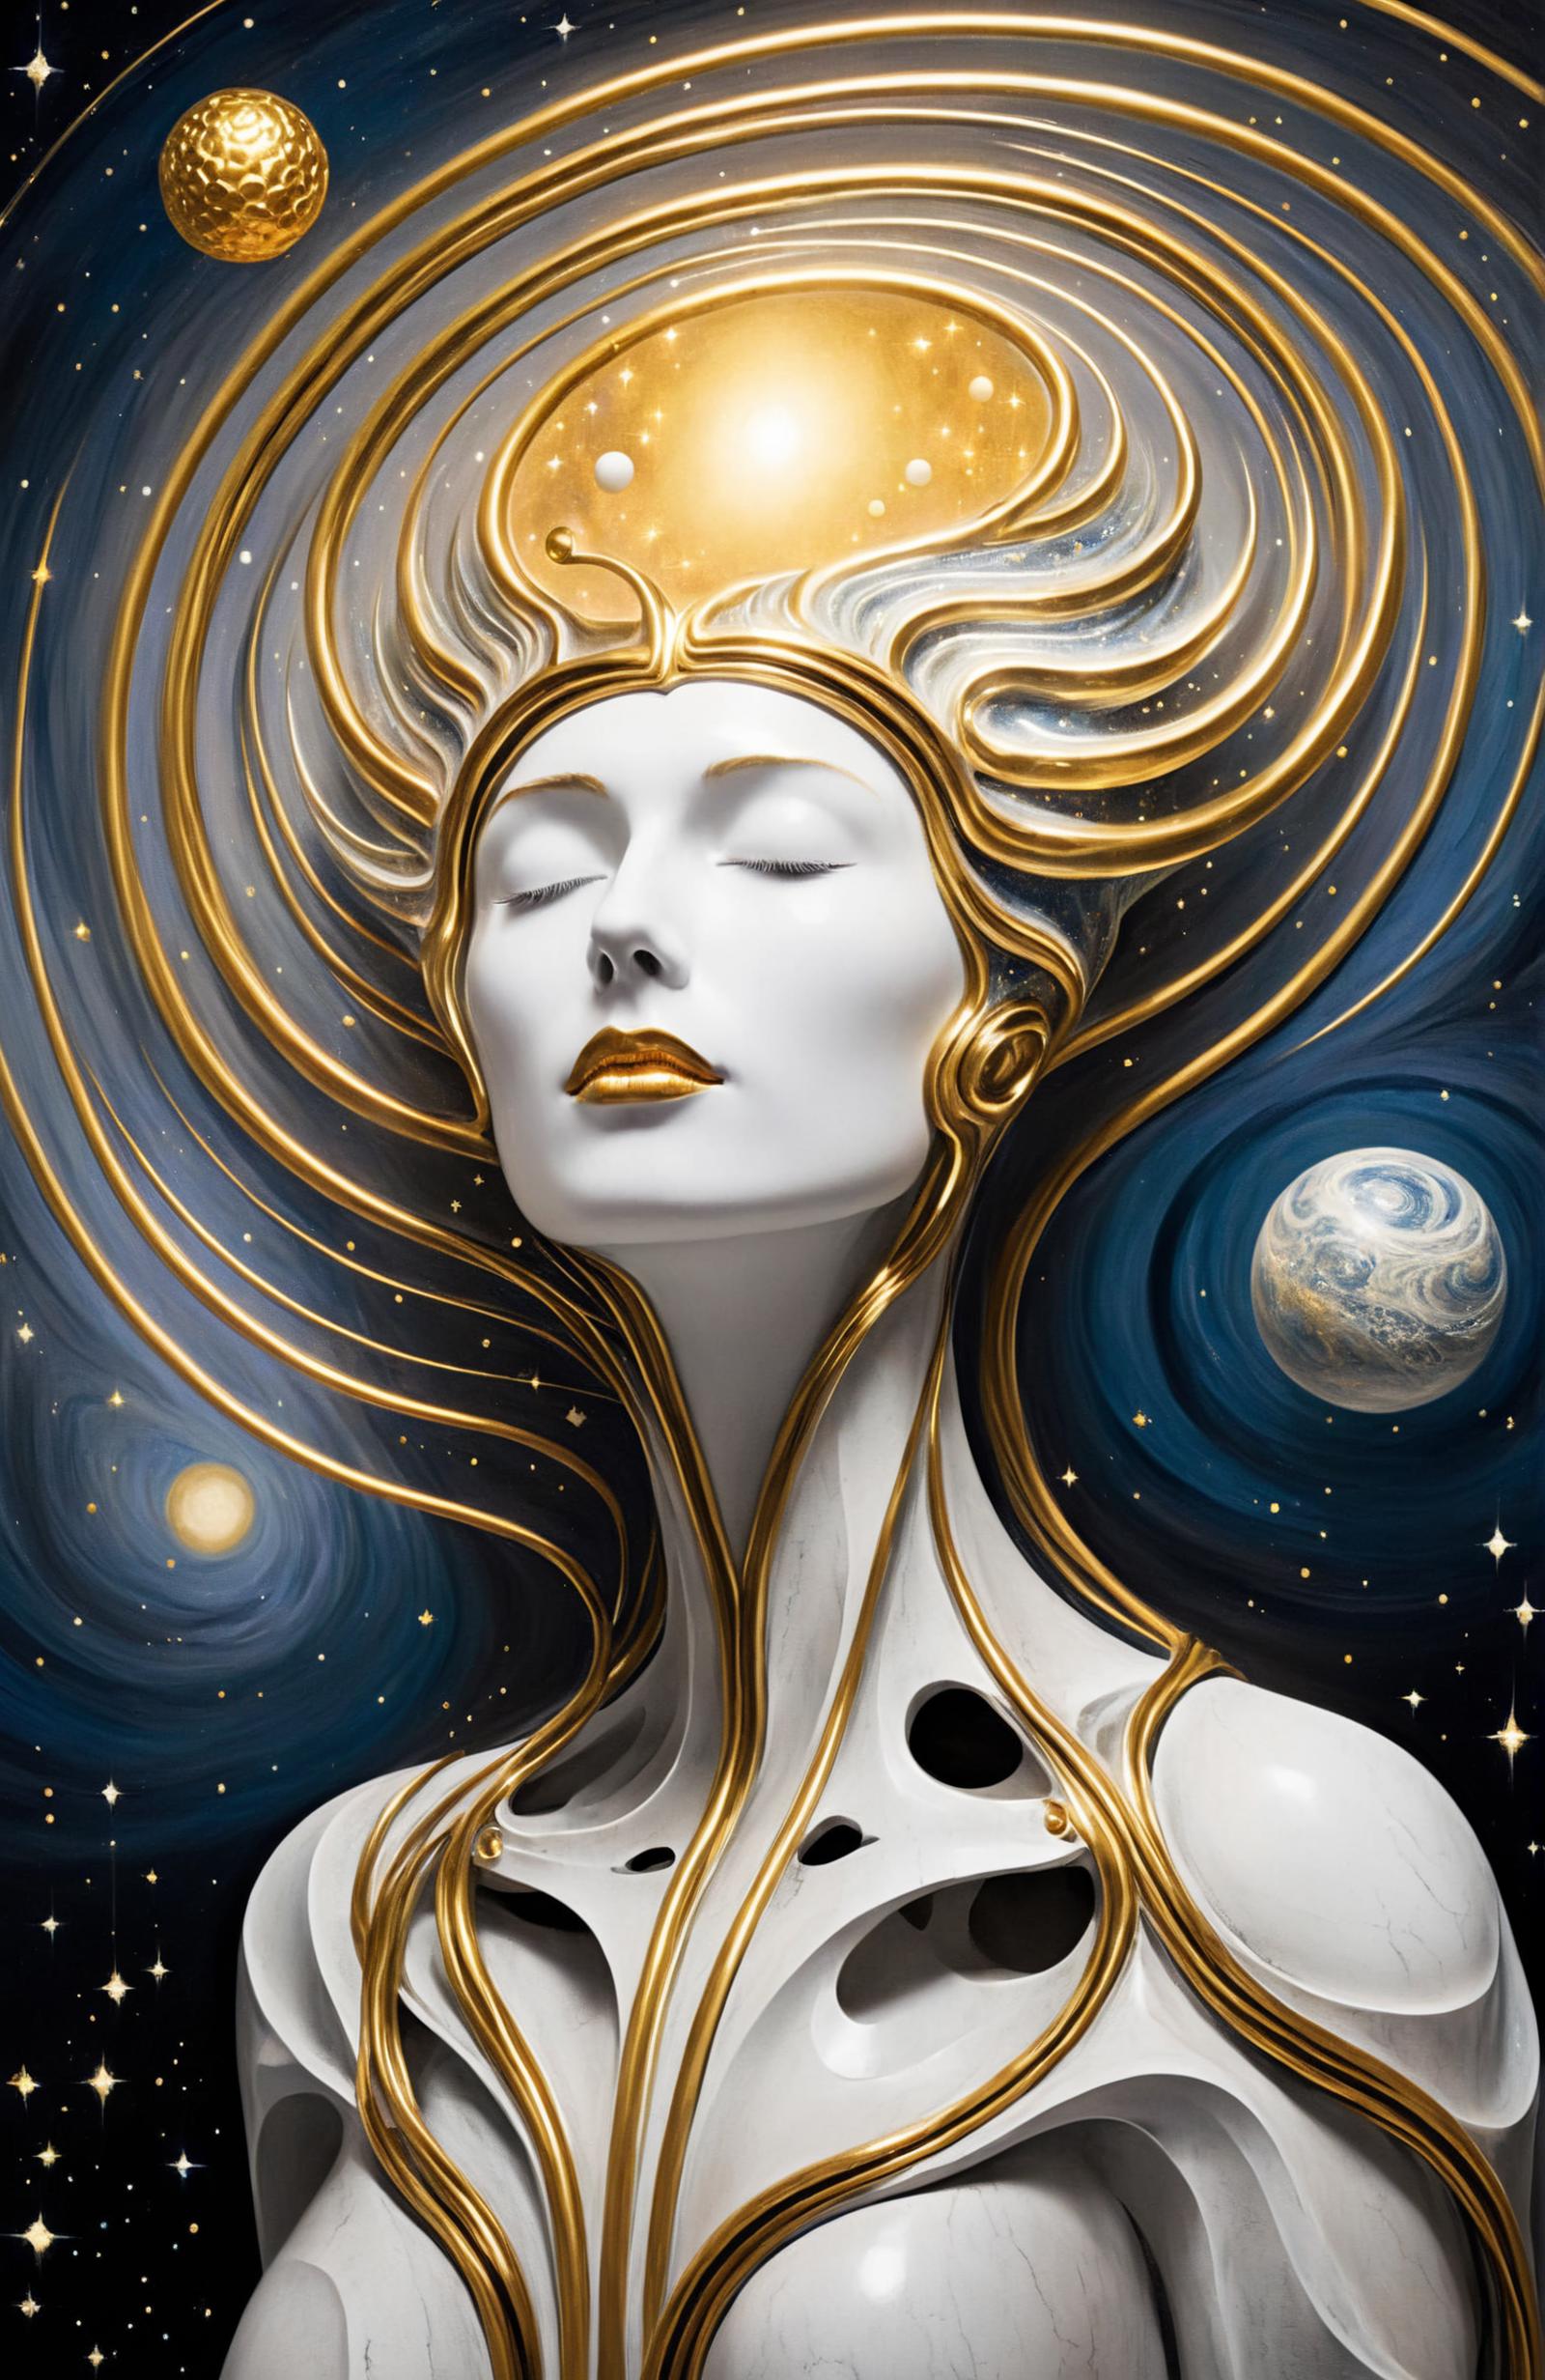 A Gold Statue of a Woman Sleeping with a Planet in the Background